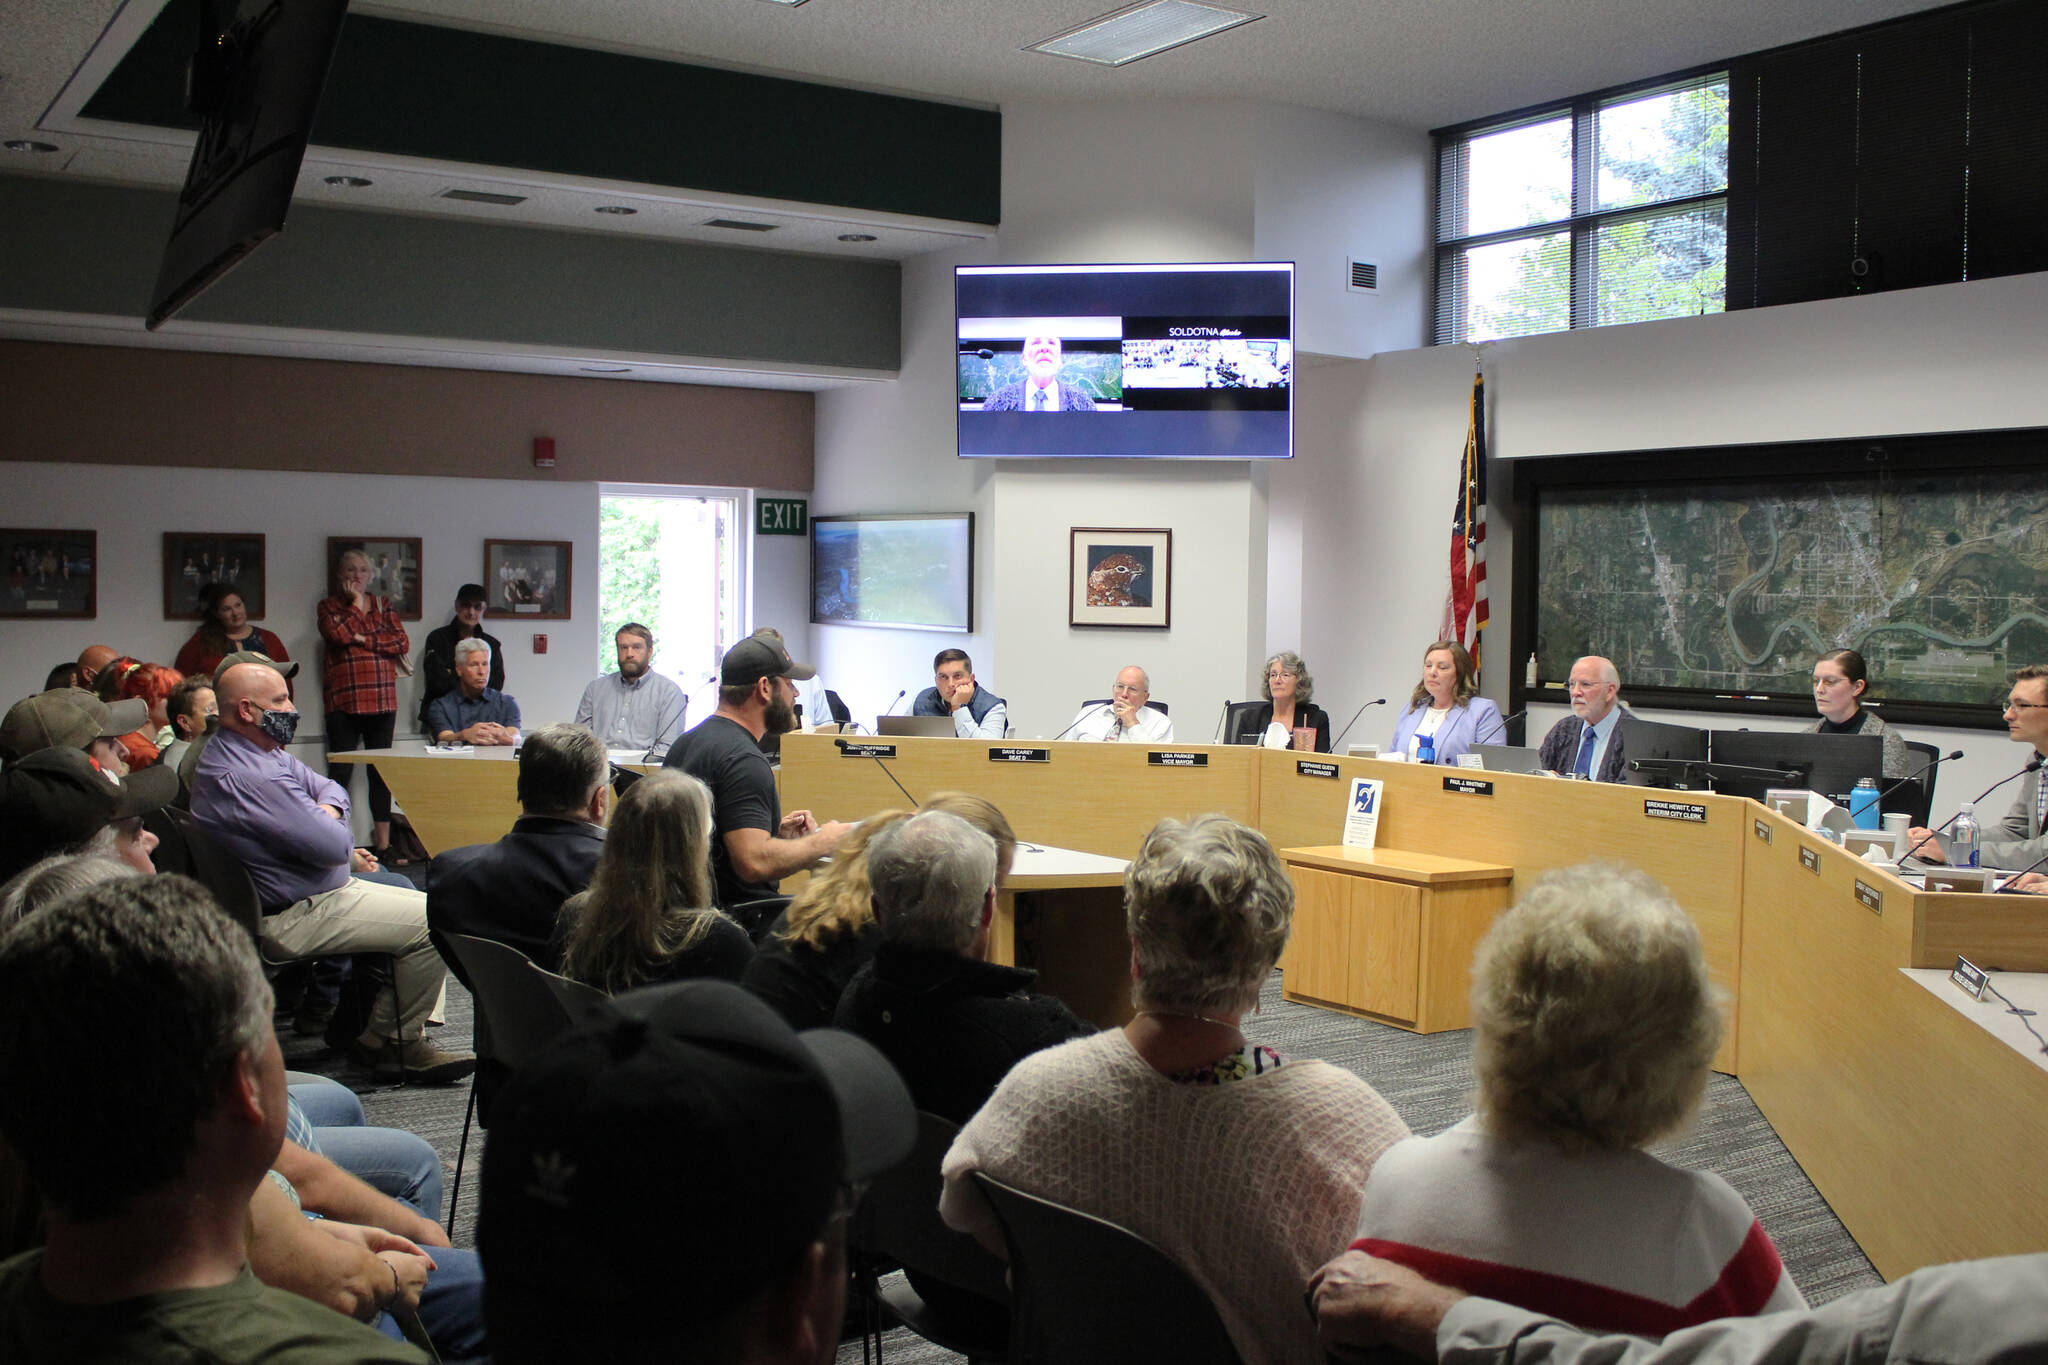 Isaac Kolesar testifies before the Soldotna City Council during a council meeting on Wednesday, July 12, 2022 in Soldotna, Alaska. Many attendees voiced their thoughts on a performance given by a drag queen in Soldotna Creek Park last month. (Ashlyn O’Hara/Peninsula Clarion)